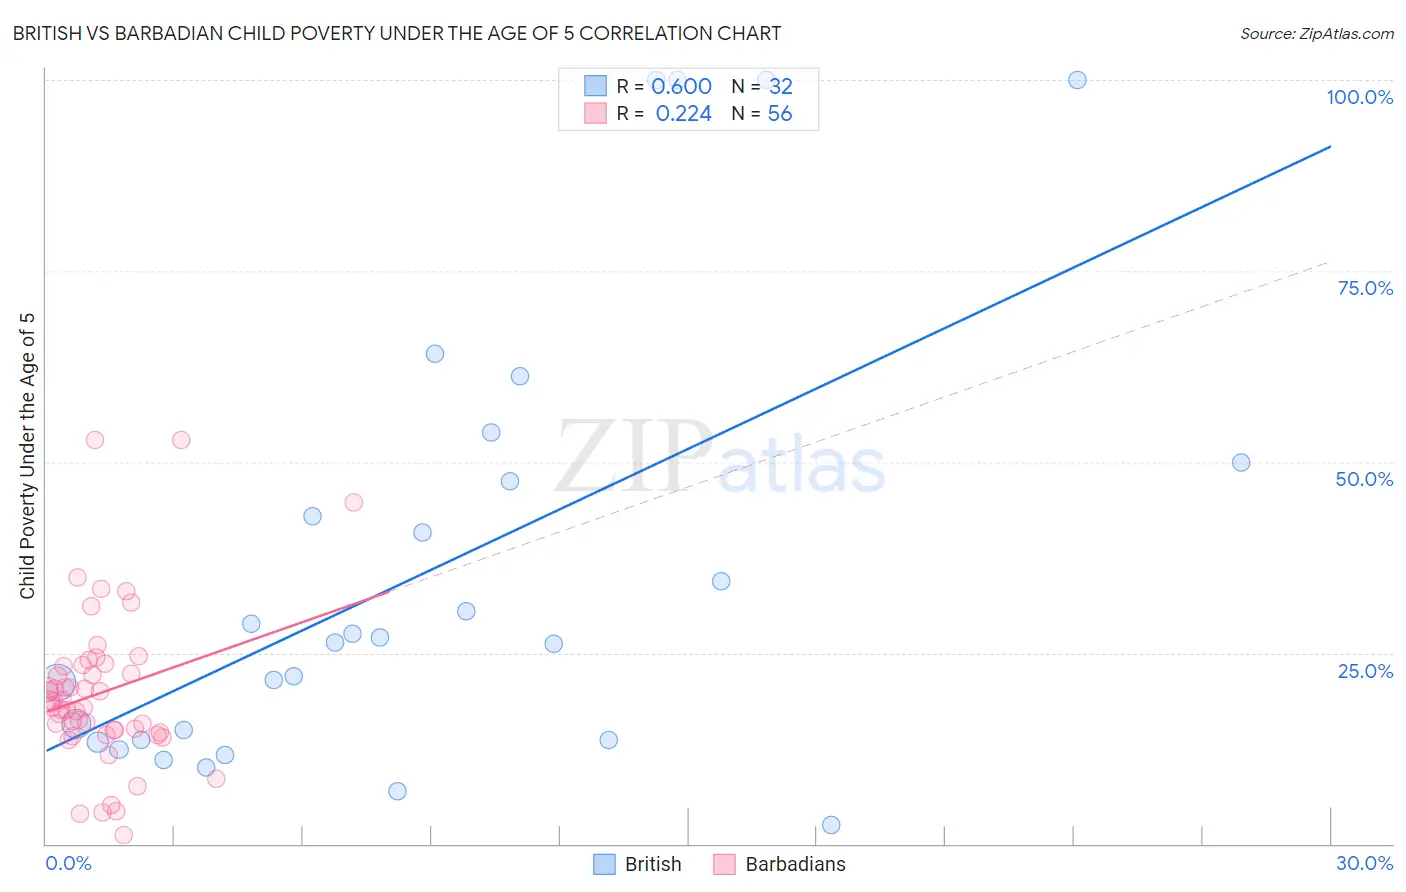 British vs Barbadian Child Poverty Under the Age of 5